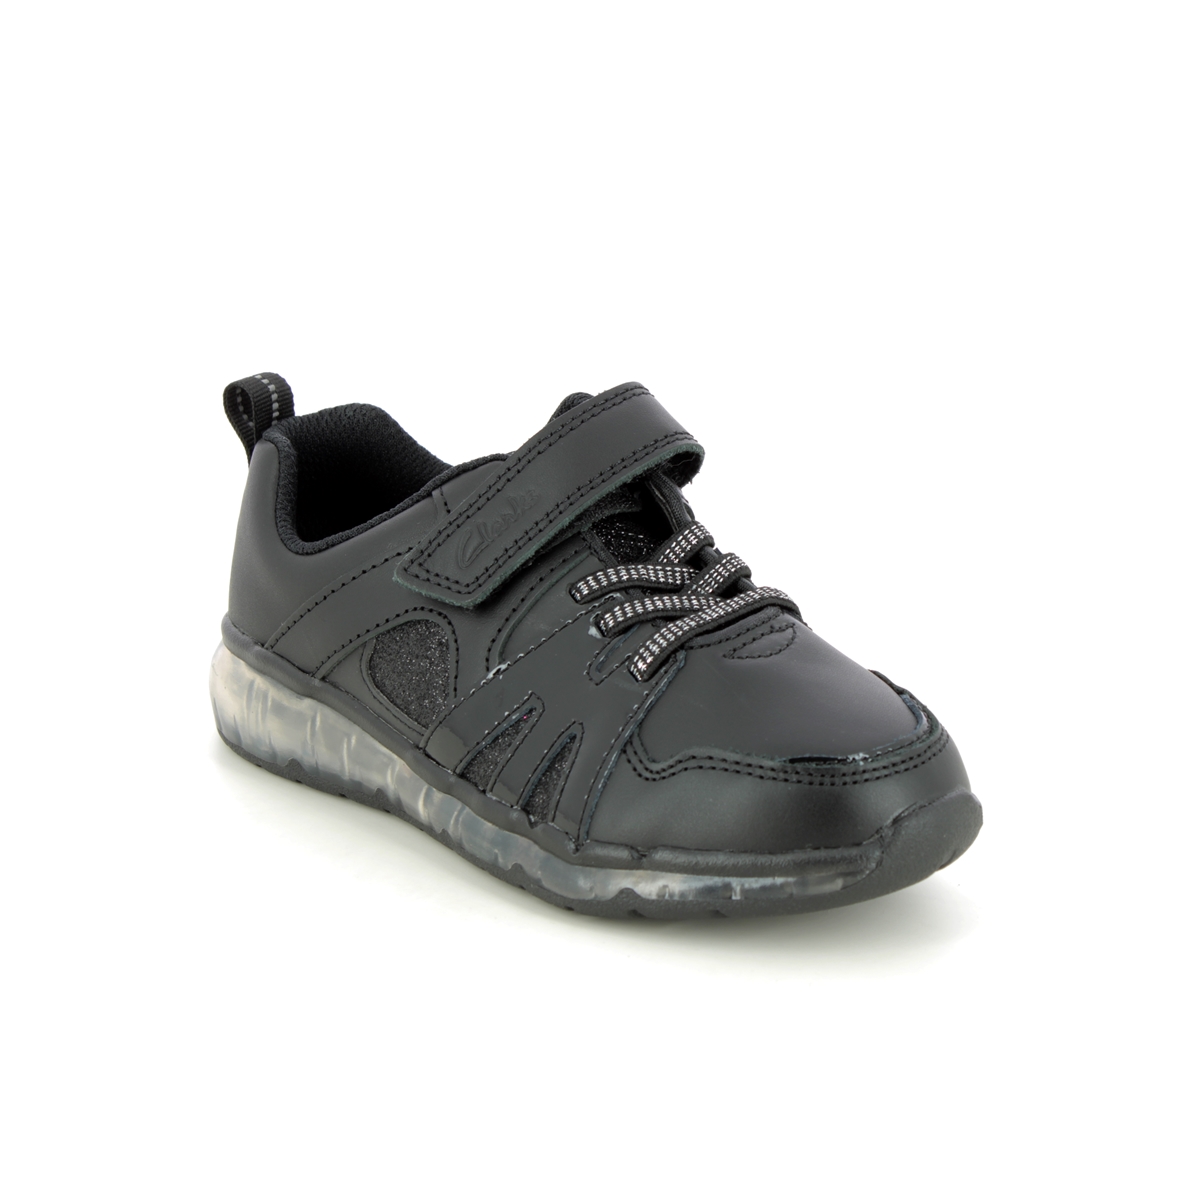 Clarks Spark Glow K Black Leather Kids Girls School Shoes 686657G In Size 10 In Plain Black Leather G Width Fitting For School For kids